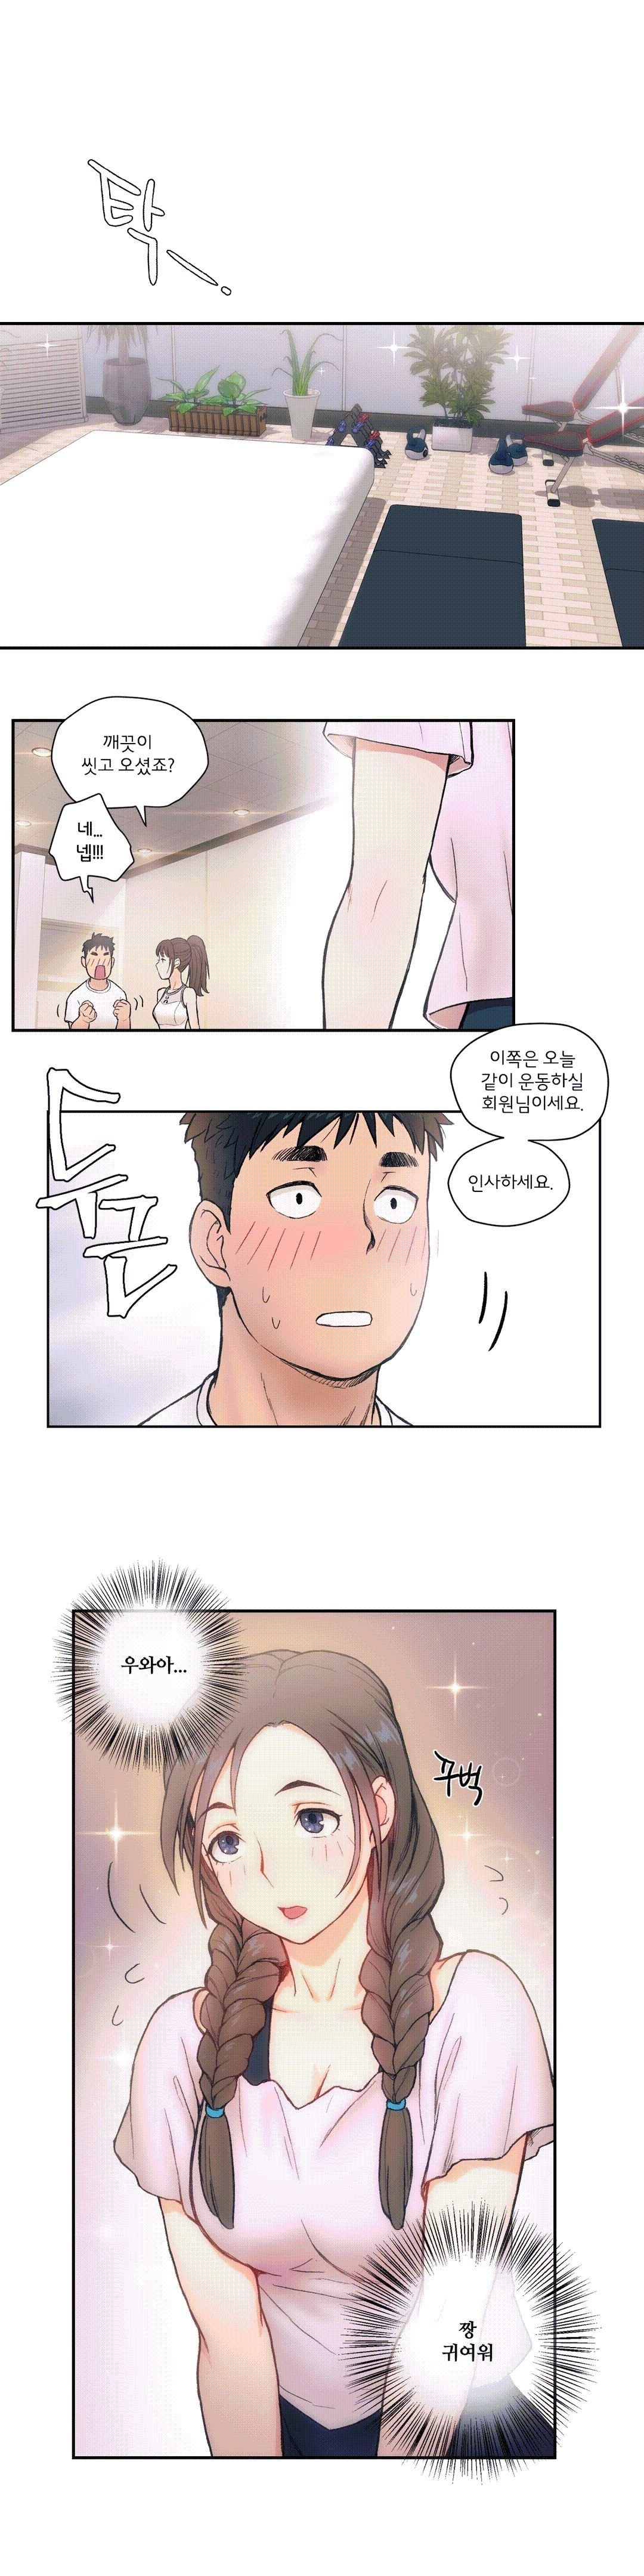 Sexercise Raw - Chapter 2 Page 10